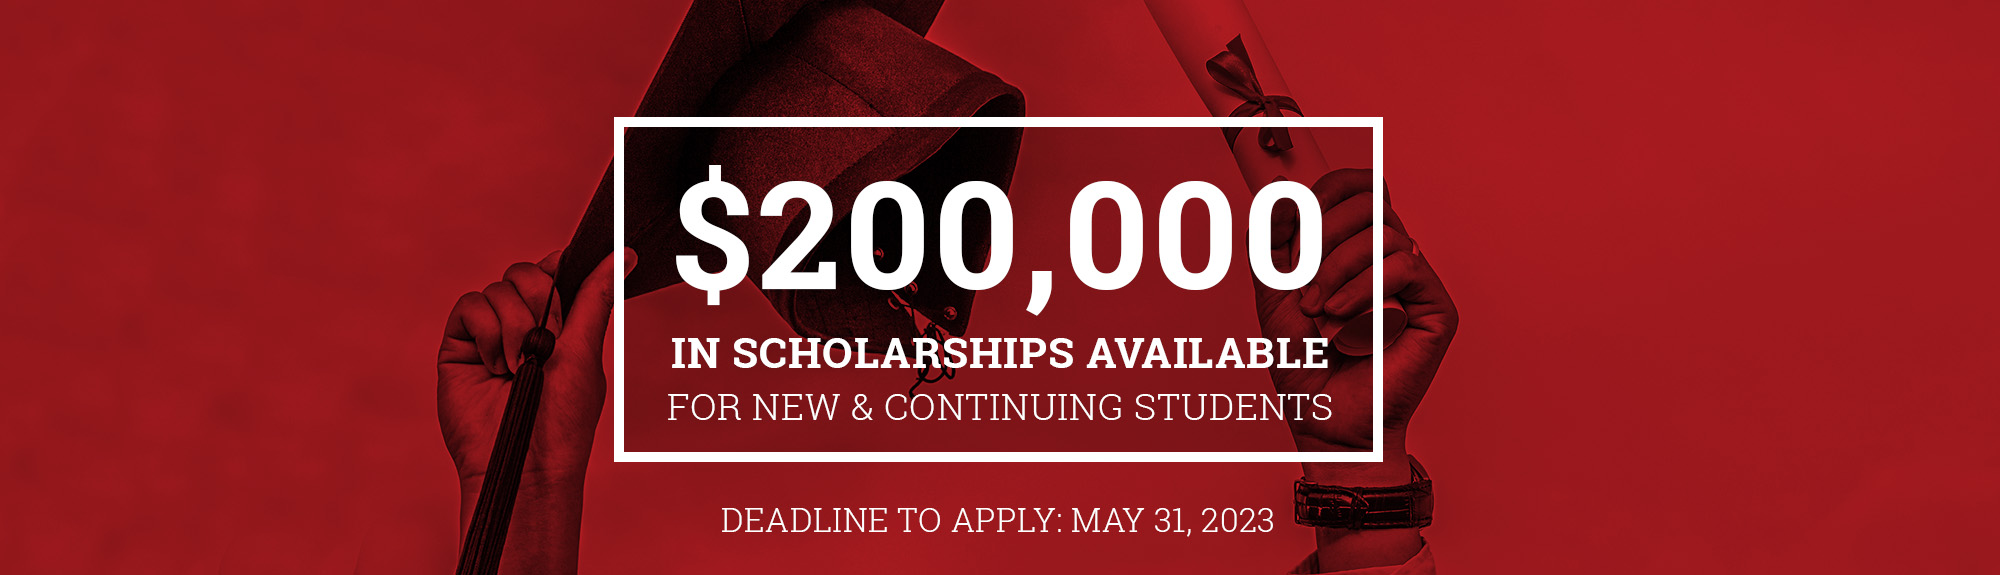 $200,000 in scholarship funds available for new and continuing students